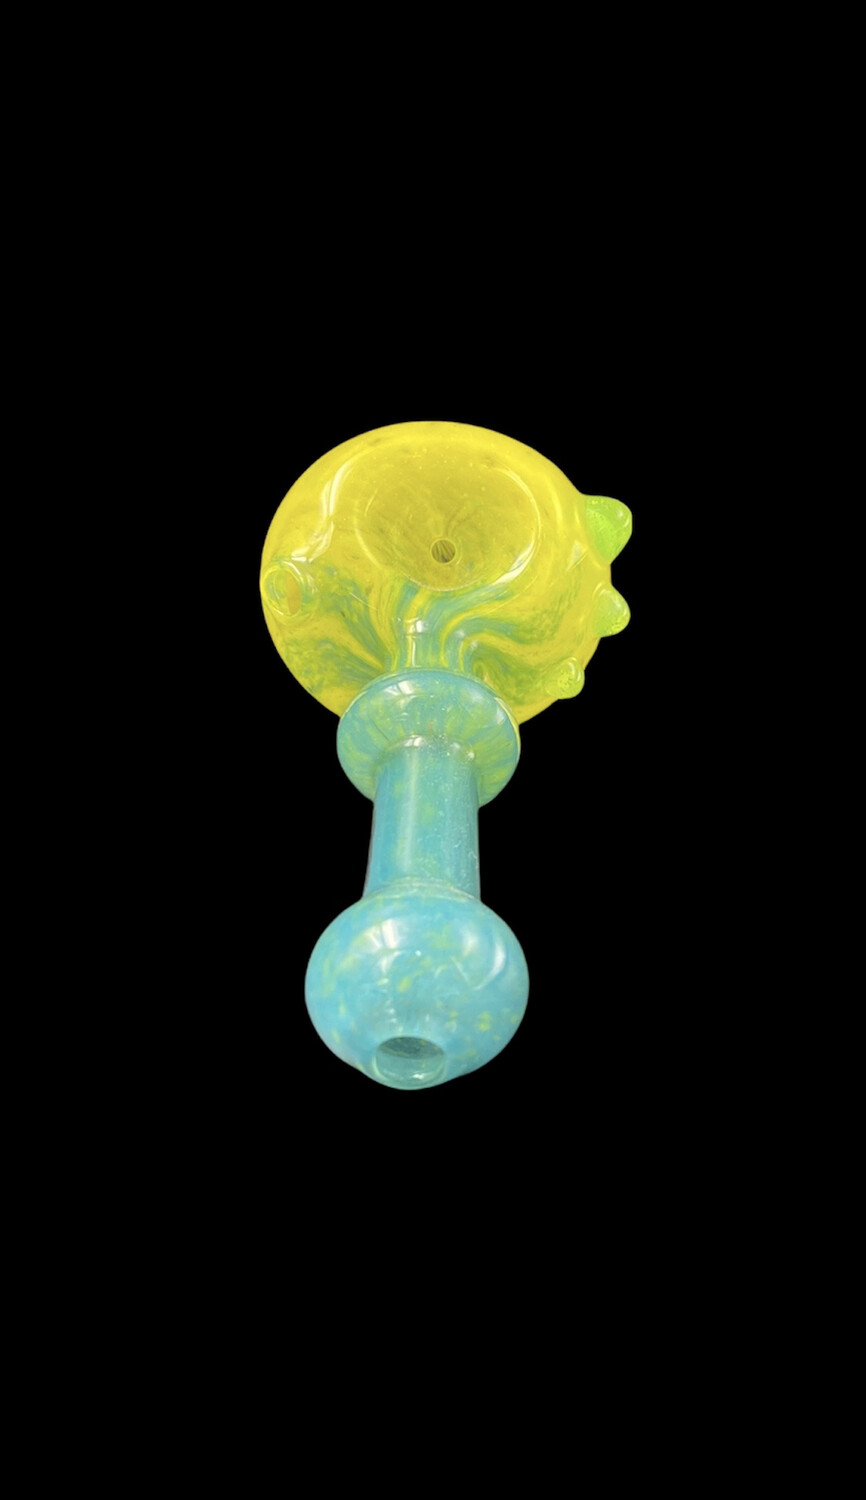 Goblin King (TX) Frit Spoon -Blue to Yellow